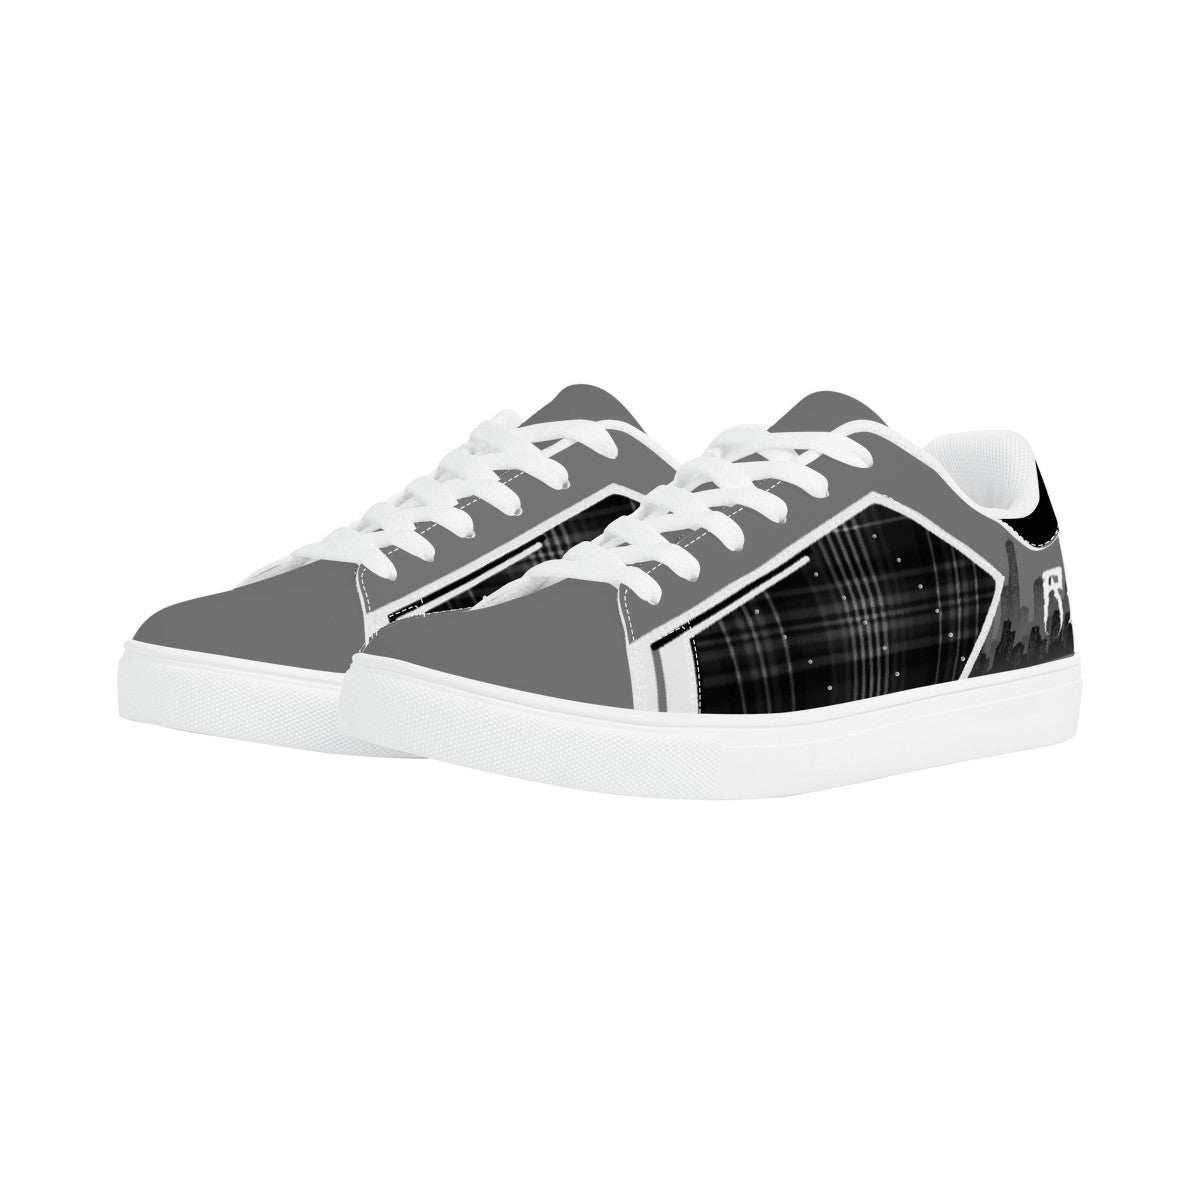 RVT Low-Top Synthetic Leather Sneakers - Skyline Plaid